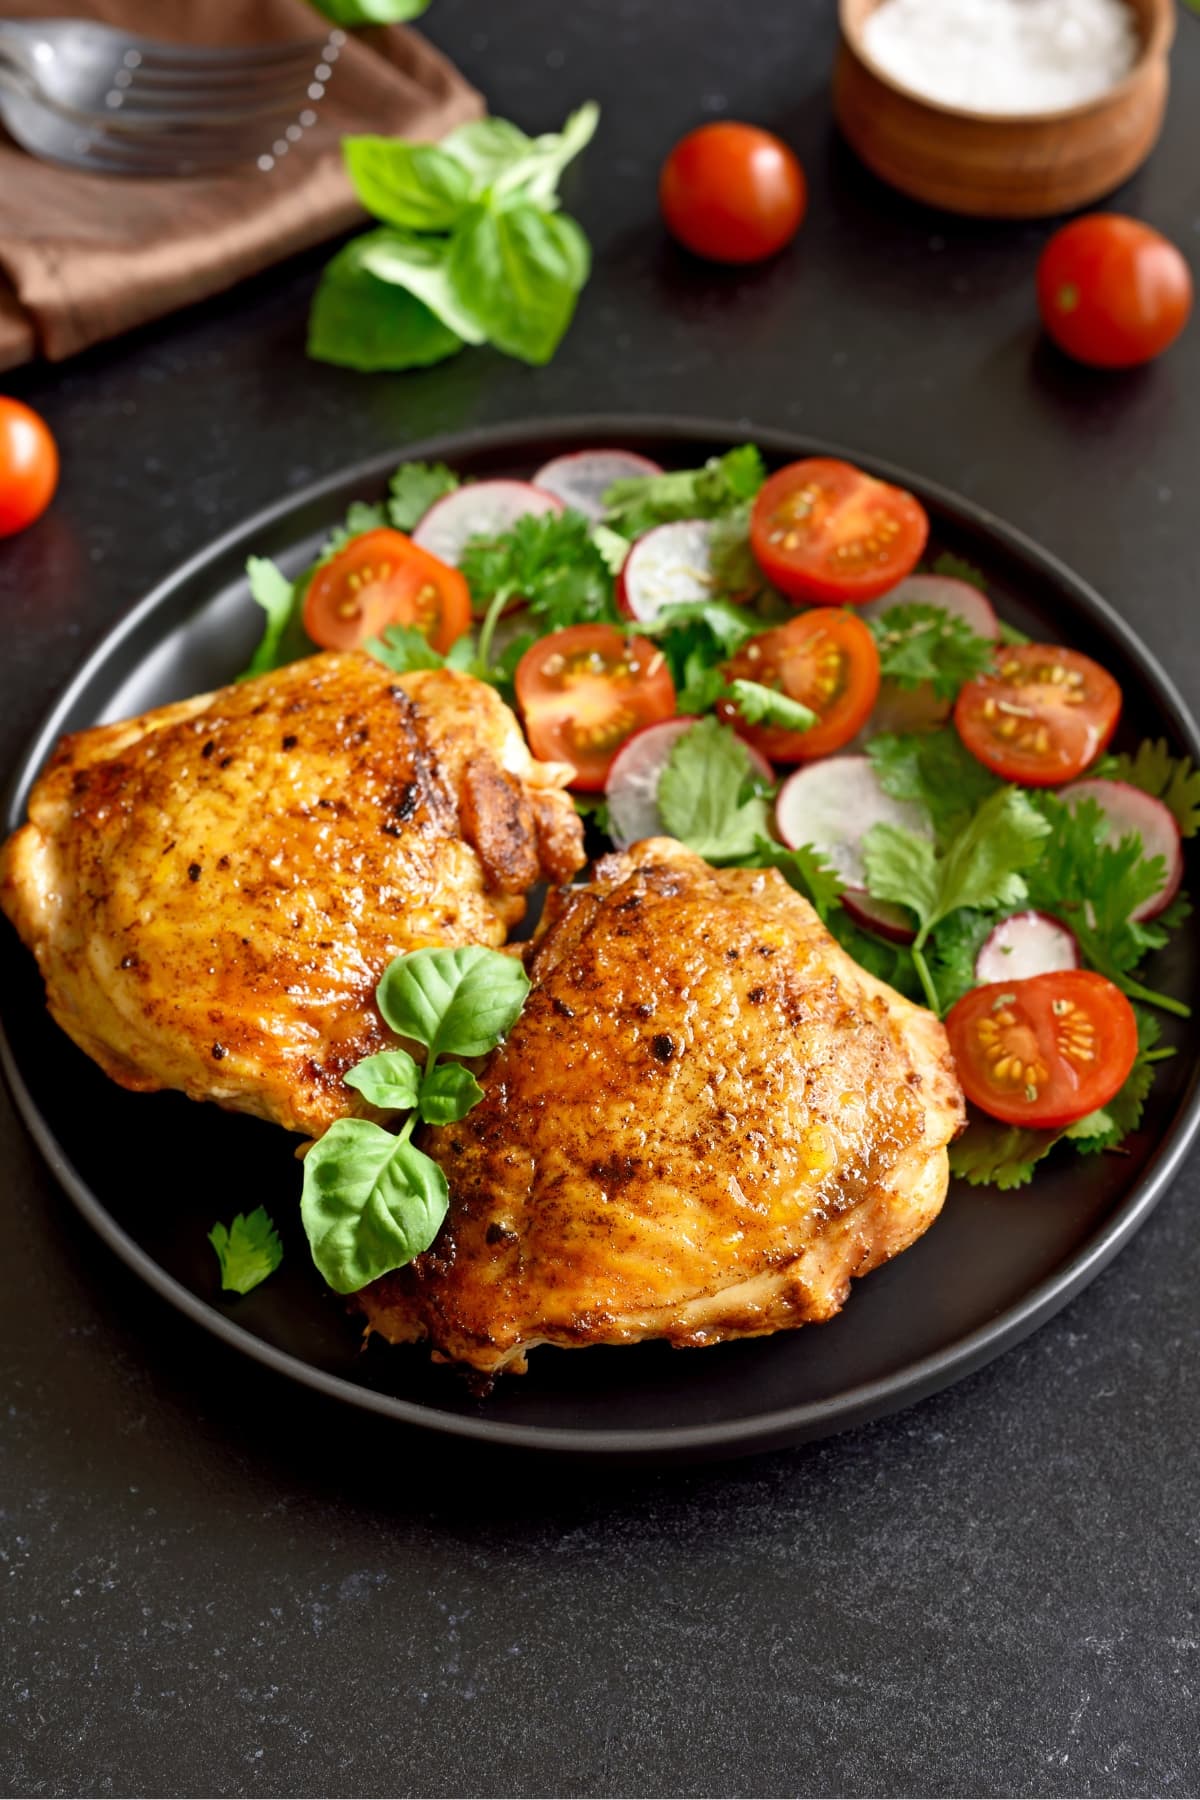 Baked chicken thighs with radish, tomato, and herb salad on a plate.